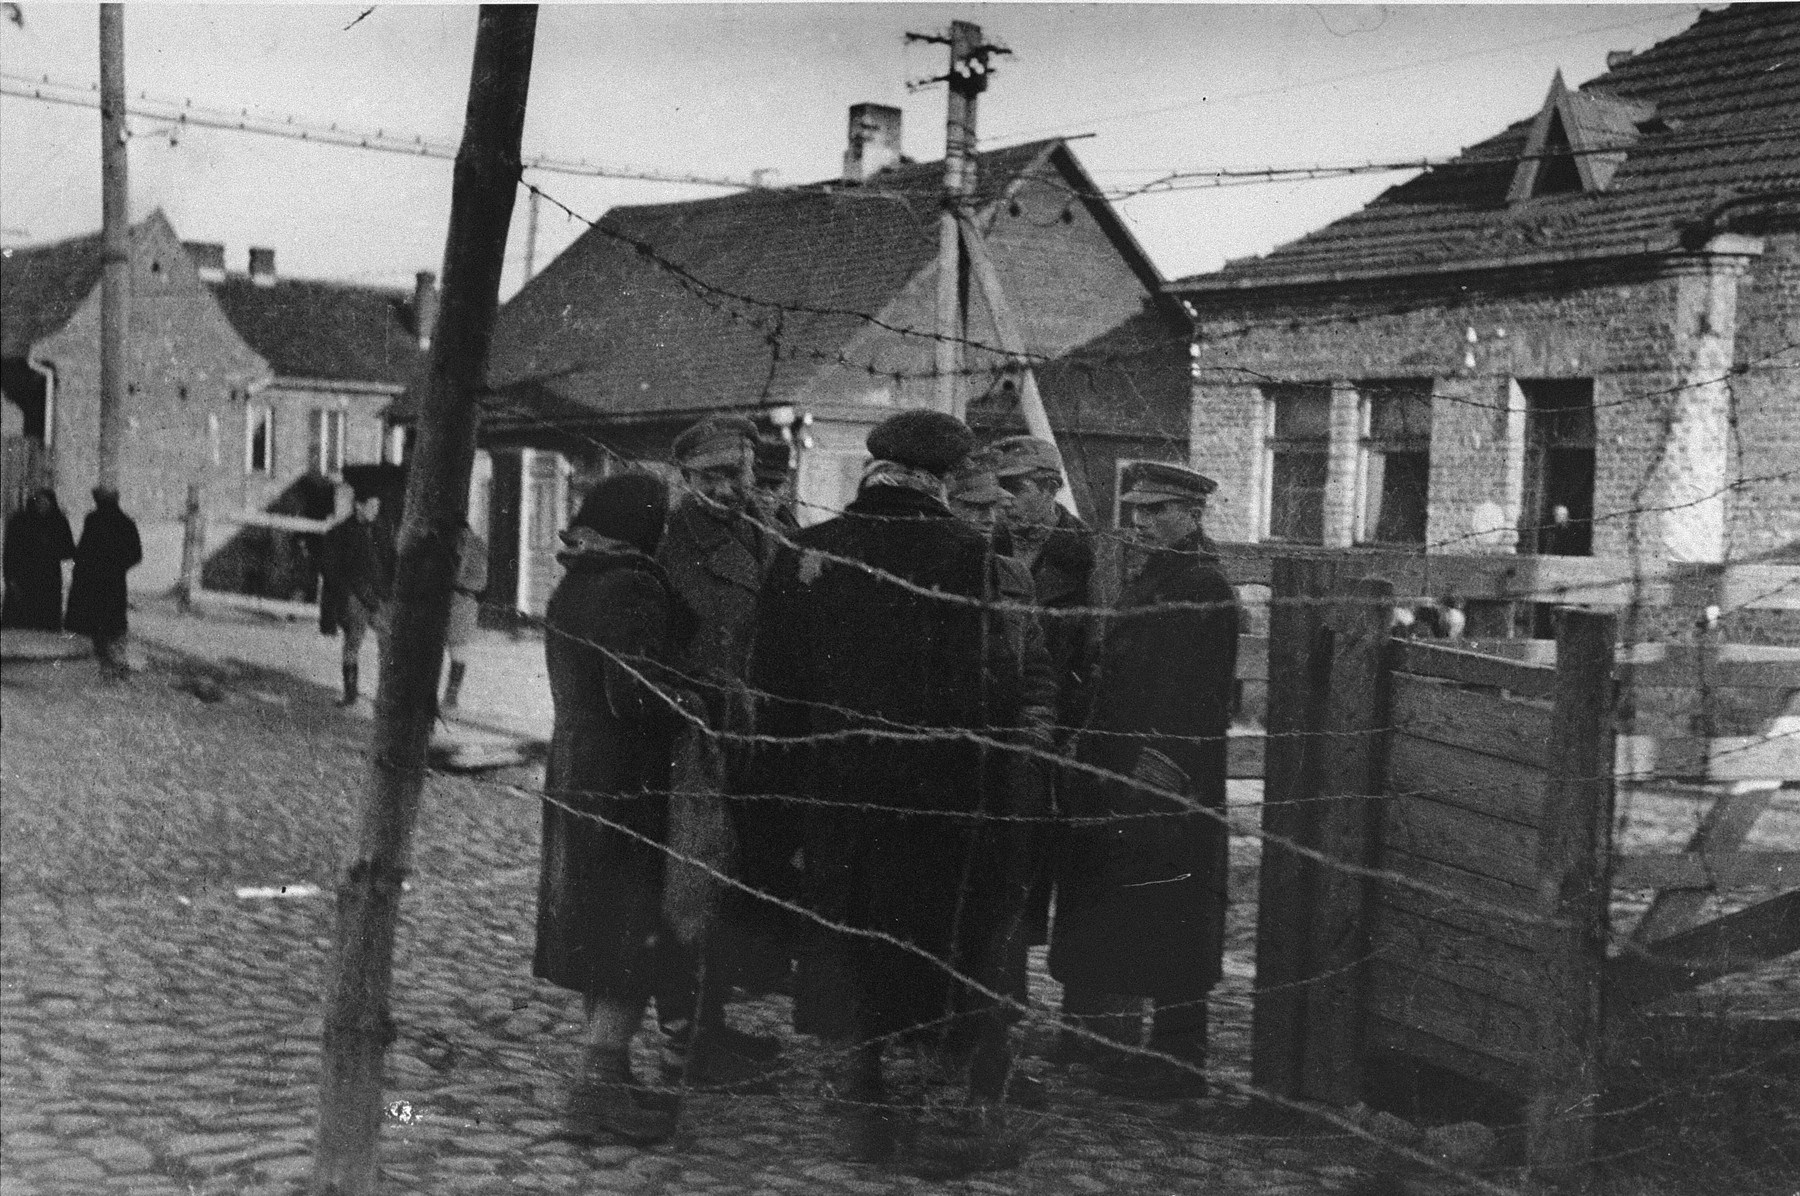 Jacob (Yankel) Verbovski (far right), a representative of the Altestenrat labor office, talks with a group of Jews near the Varniu Street entrance to the Kovno ghetto.

Verbovski was known as the ghetto's "count man".  He was in charge of counting people coming and going into the ghetto.  In that capacity he helped members of the resistance to escape from the ghetto, and he helped smuggle weapons and other illegal goods into the ghetto.  Verbovski survived the war and immigrated to the United States.